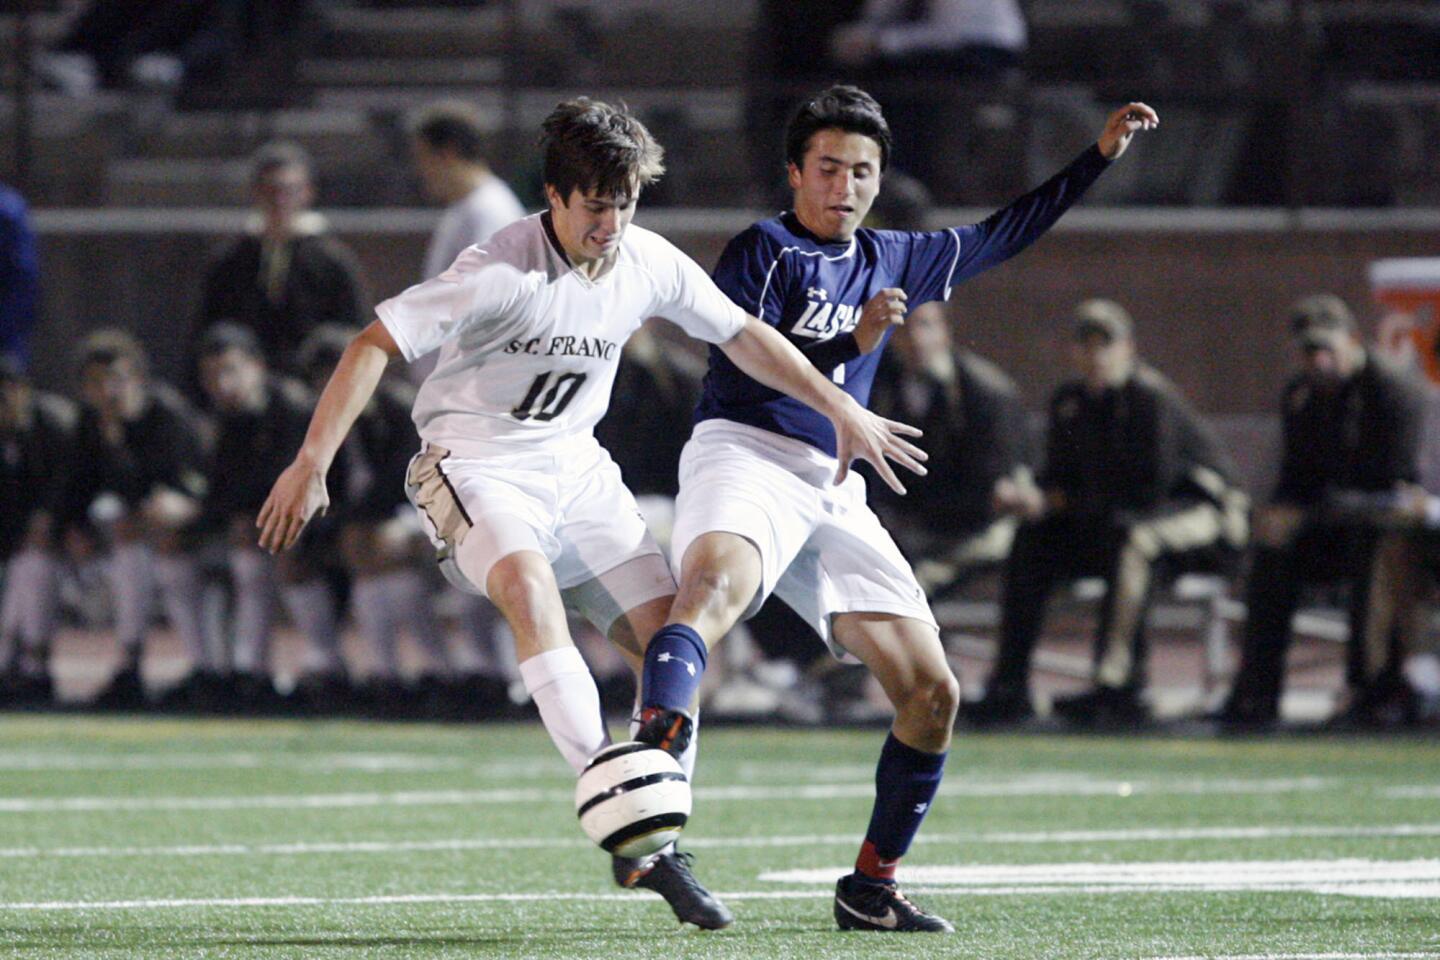 St. Francis' Brookes Treidler, left, and La Salle's Branden Sandoval fight for the ball during a game at St. Francis High School in La Canada on Tuesday, November 27, 2012.